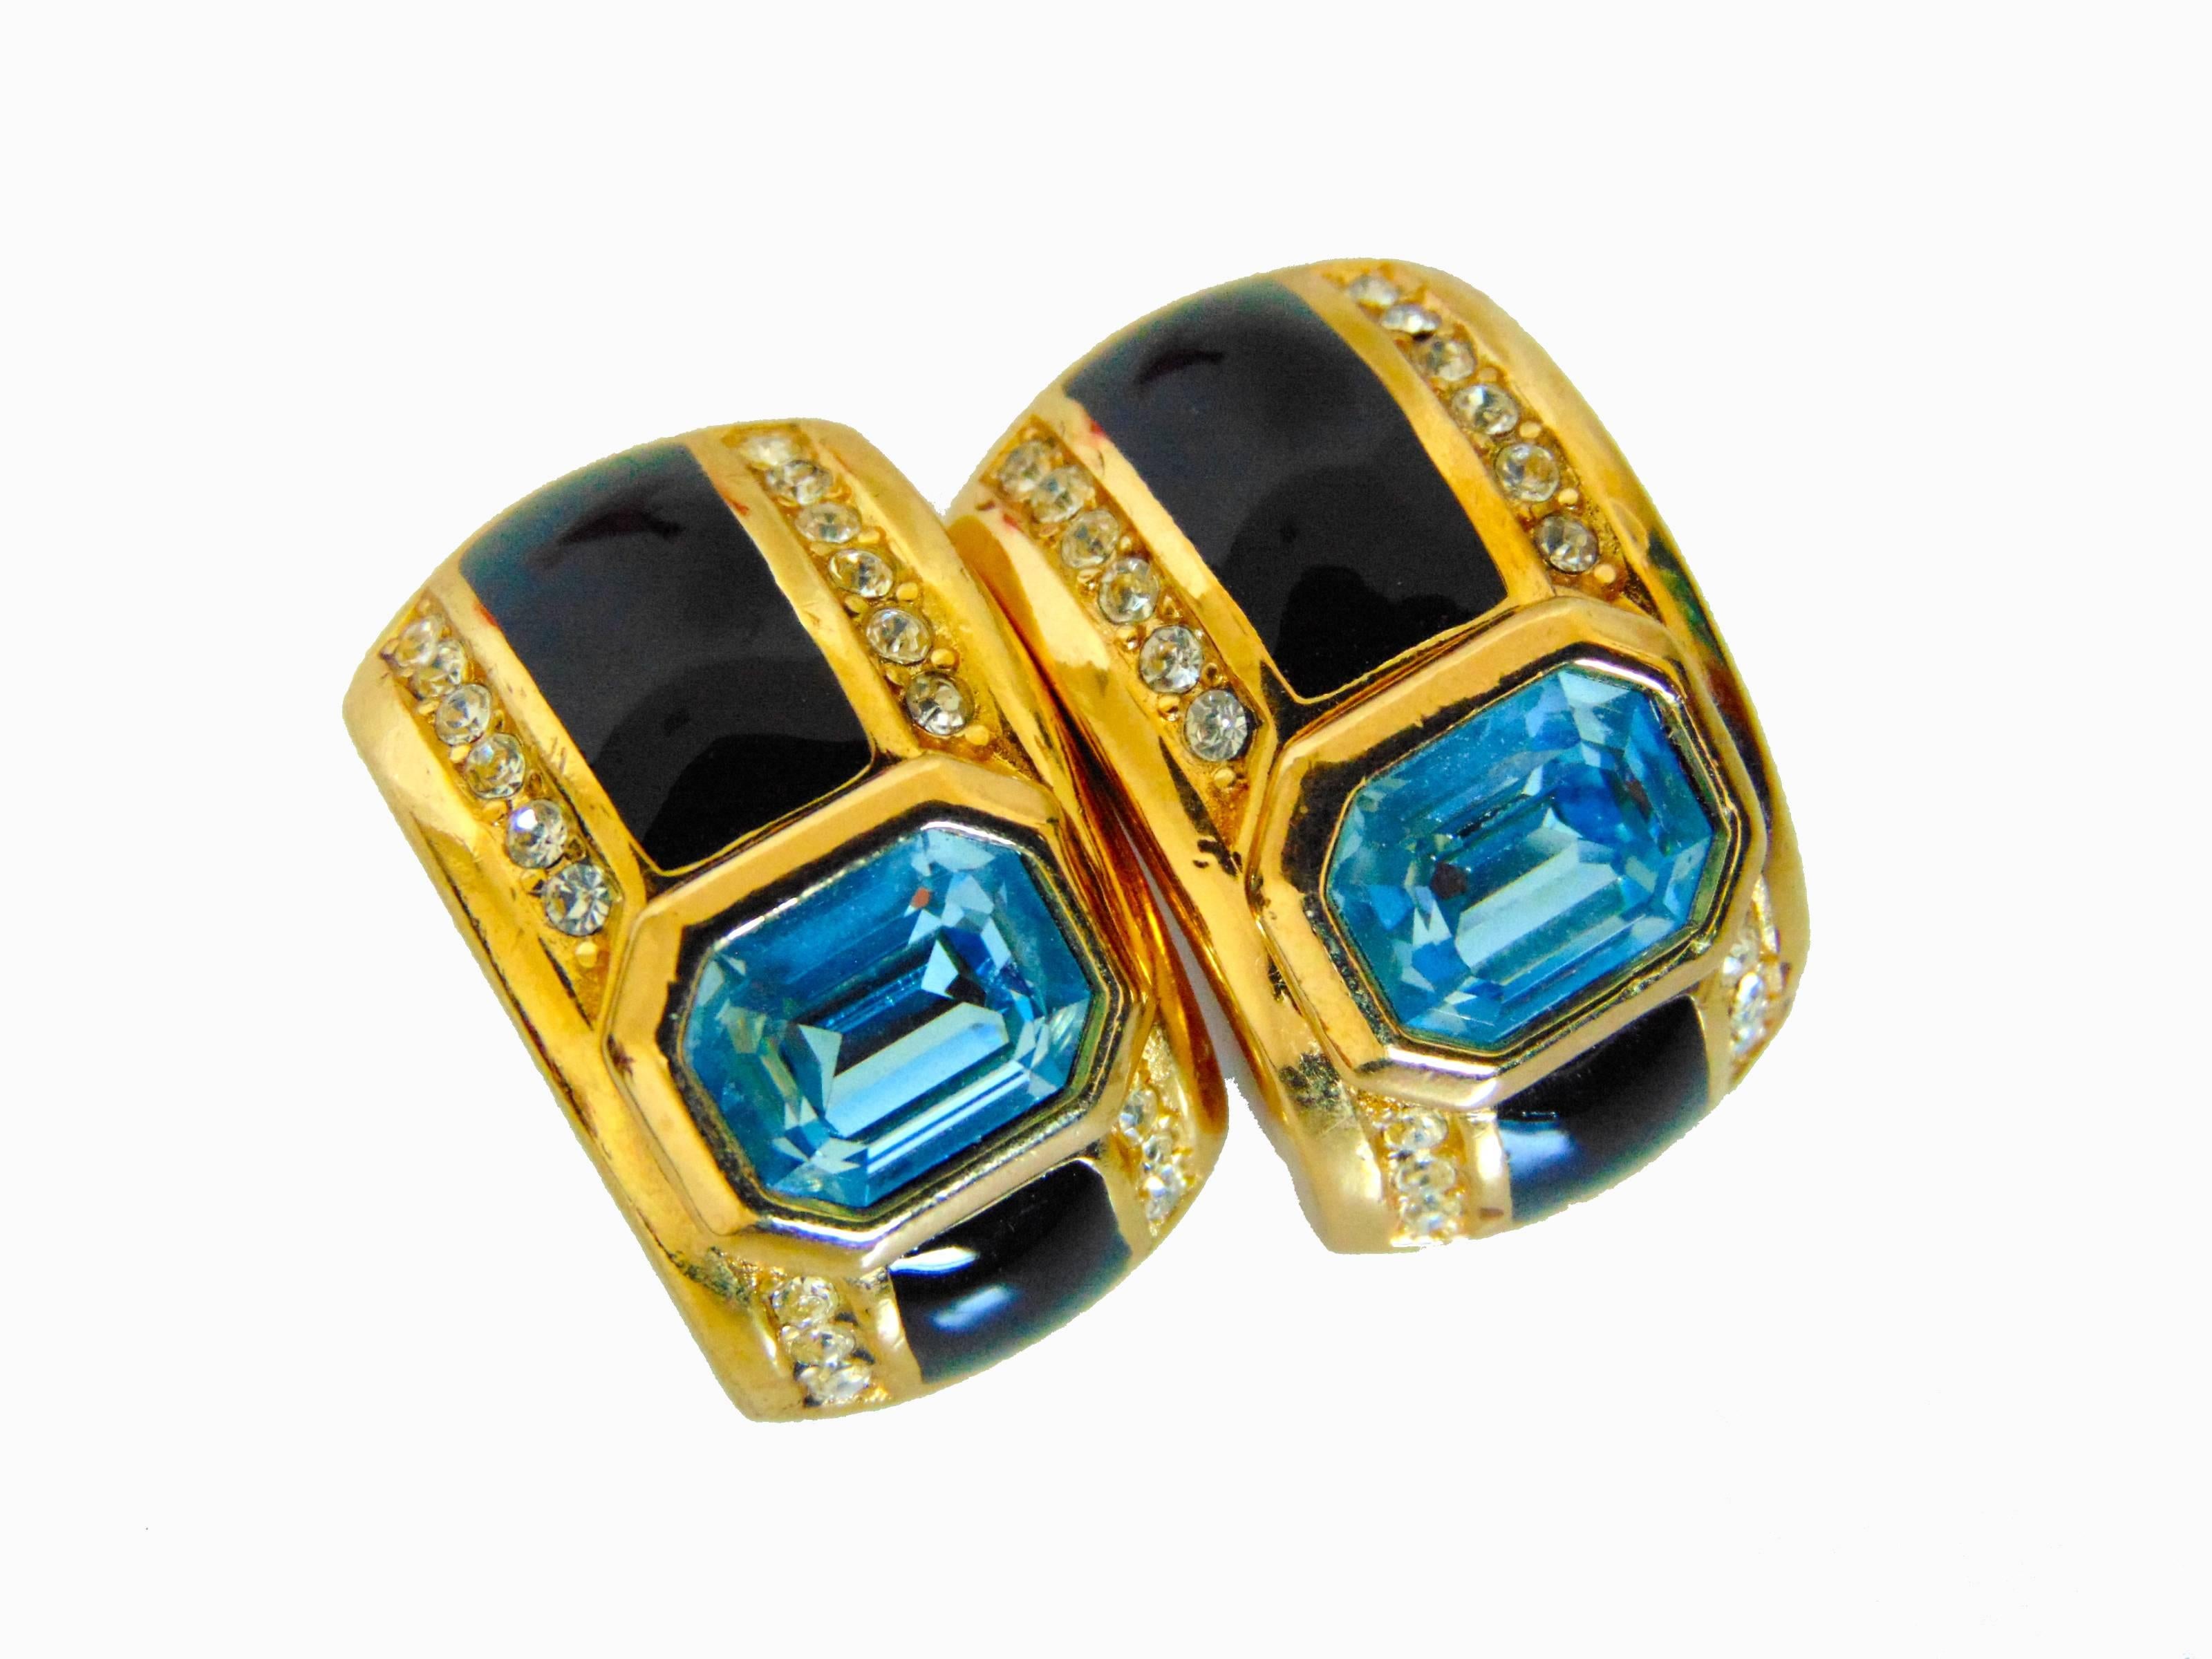 Christian Dior Art Deco Earrings with Faux Sapphire Topaz Crystals 1980s For Sale 2